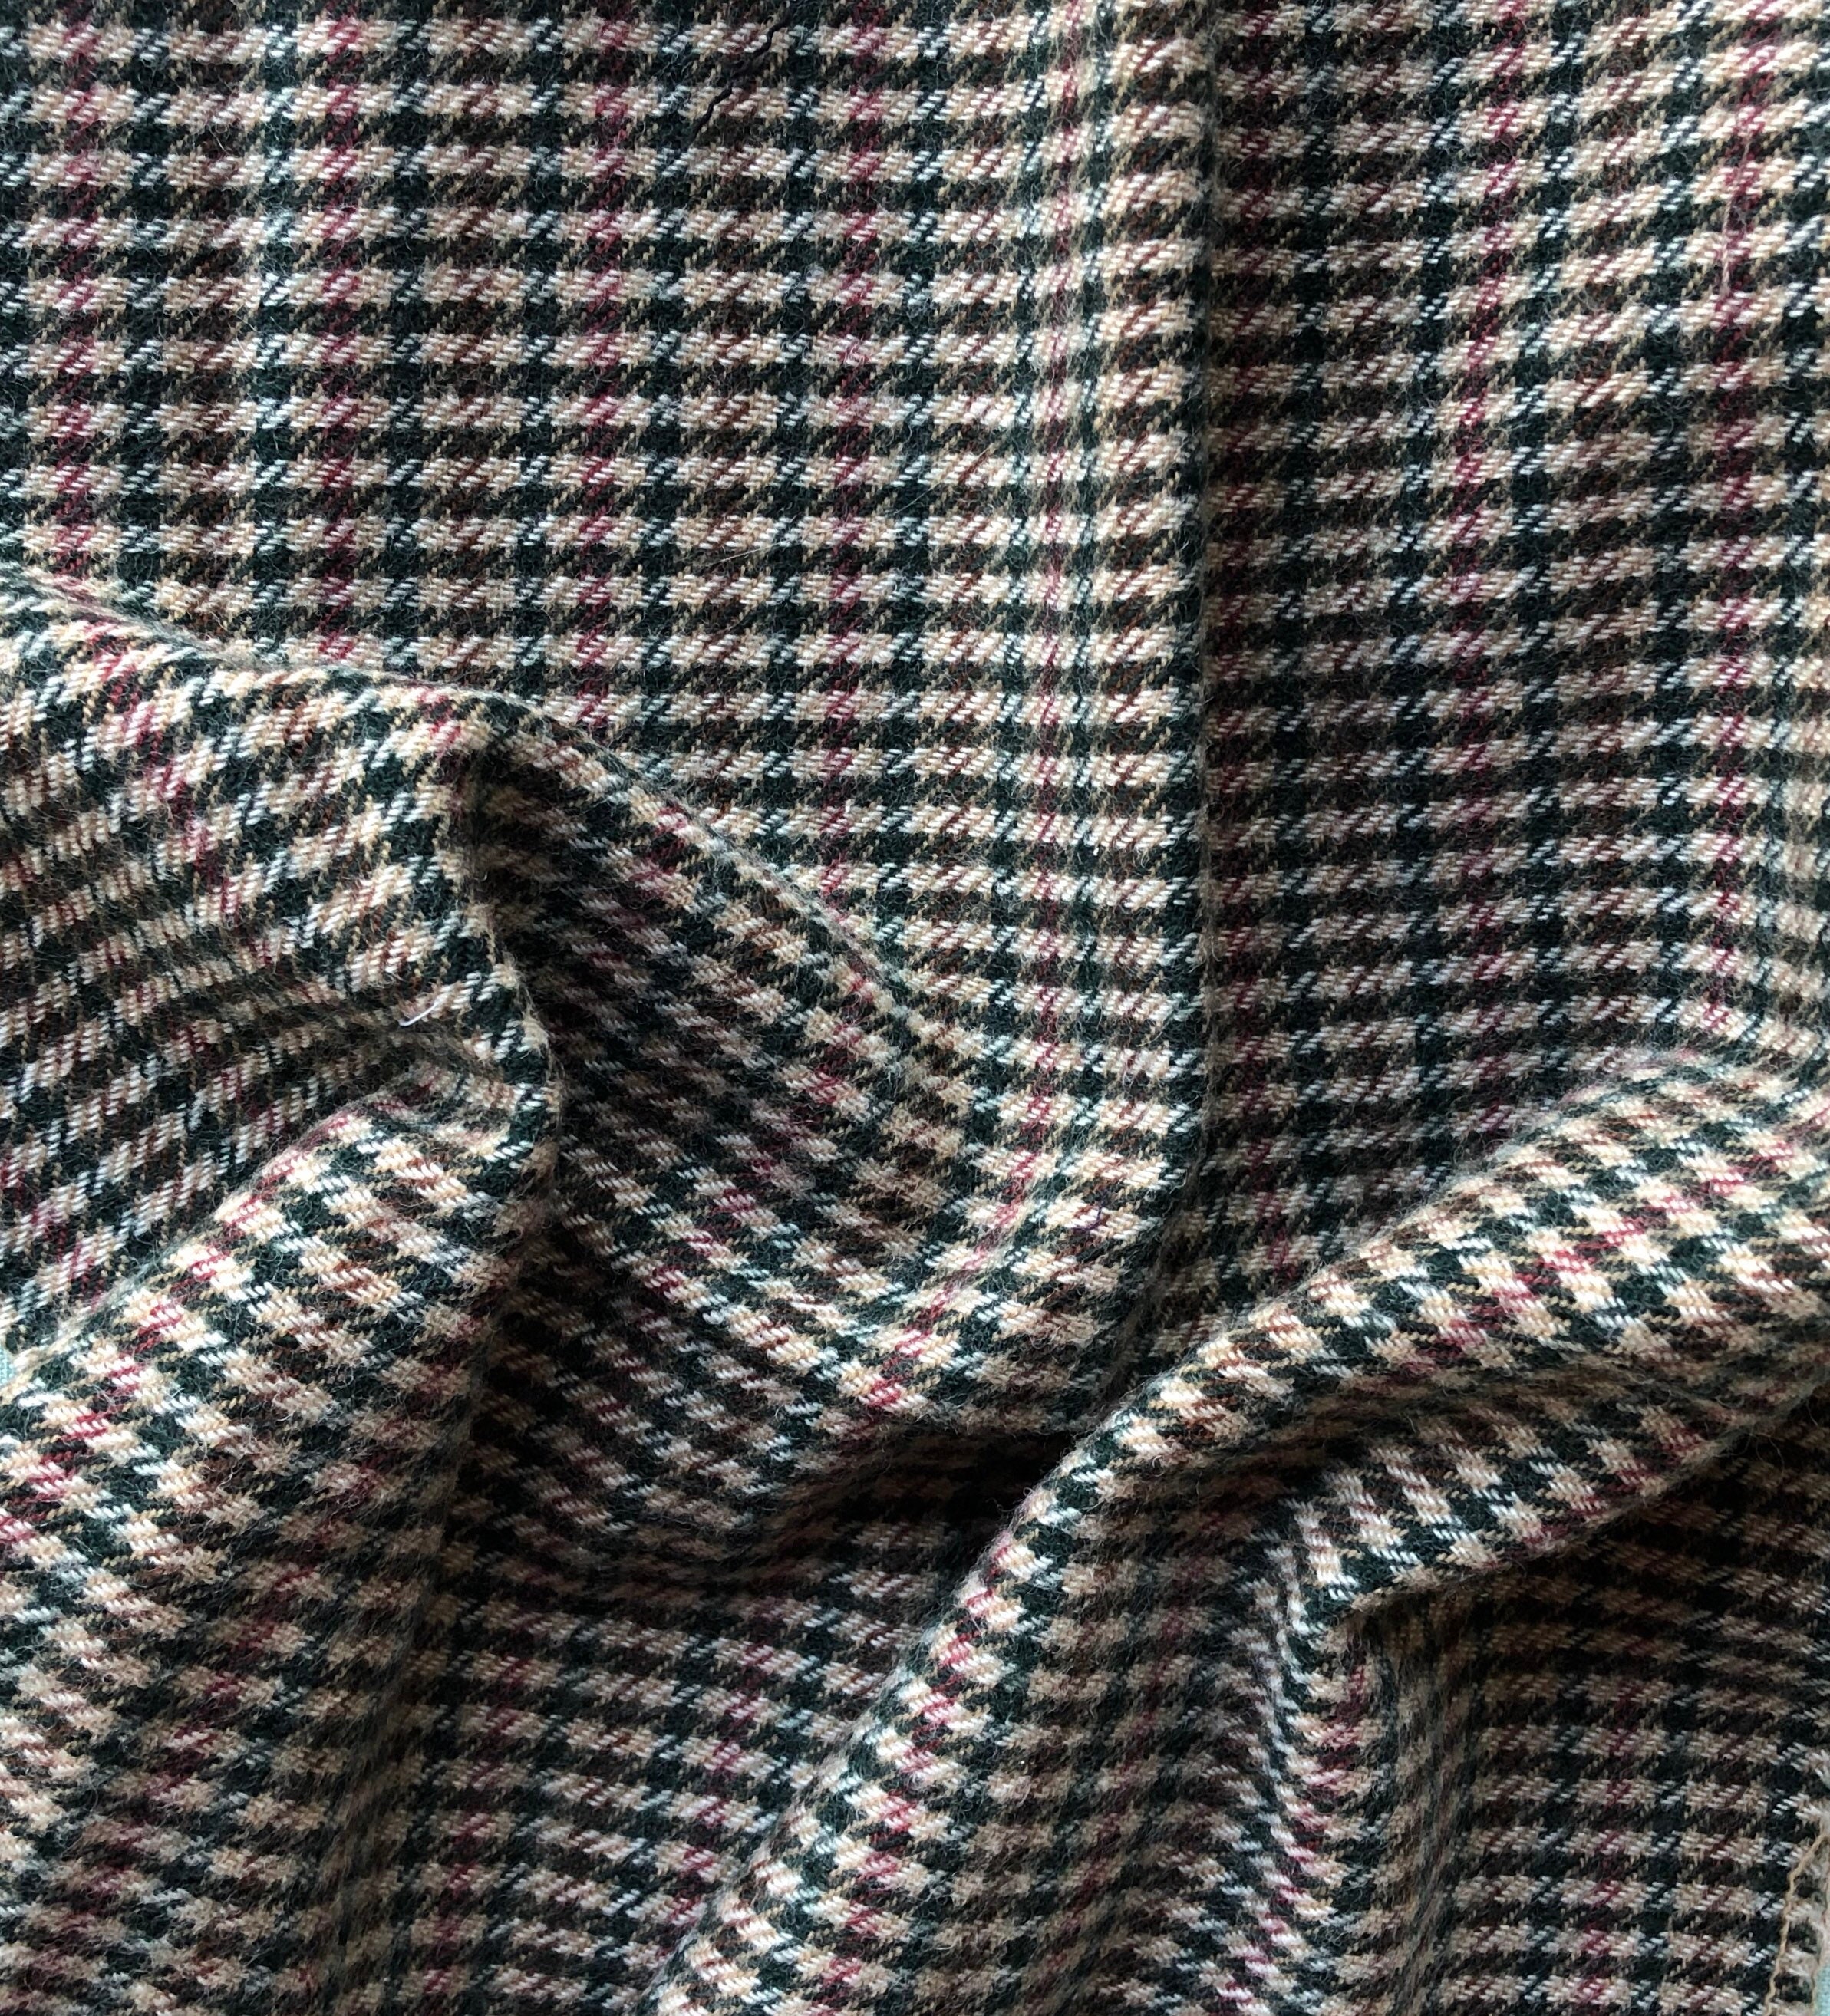 Worsted Houndstooth Pattern Silk Blends Wool Fabric,Purple&Black Check and  Plaid,62 Width,Sewing for Suits,Pants,Craft by The Yard